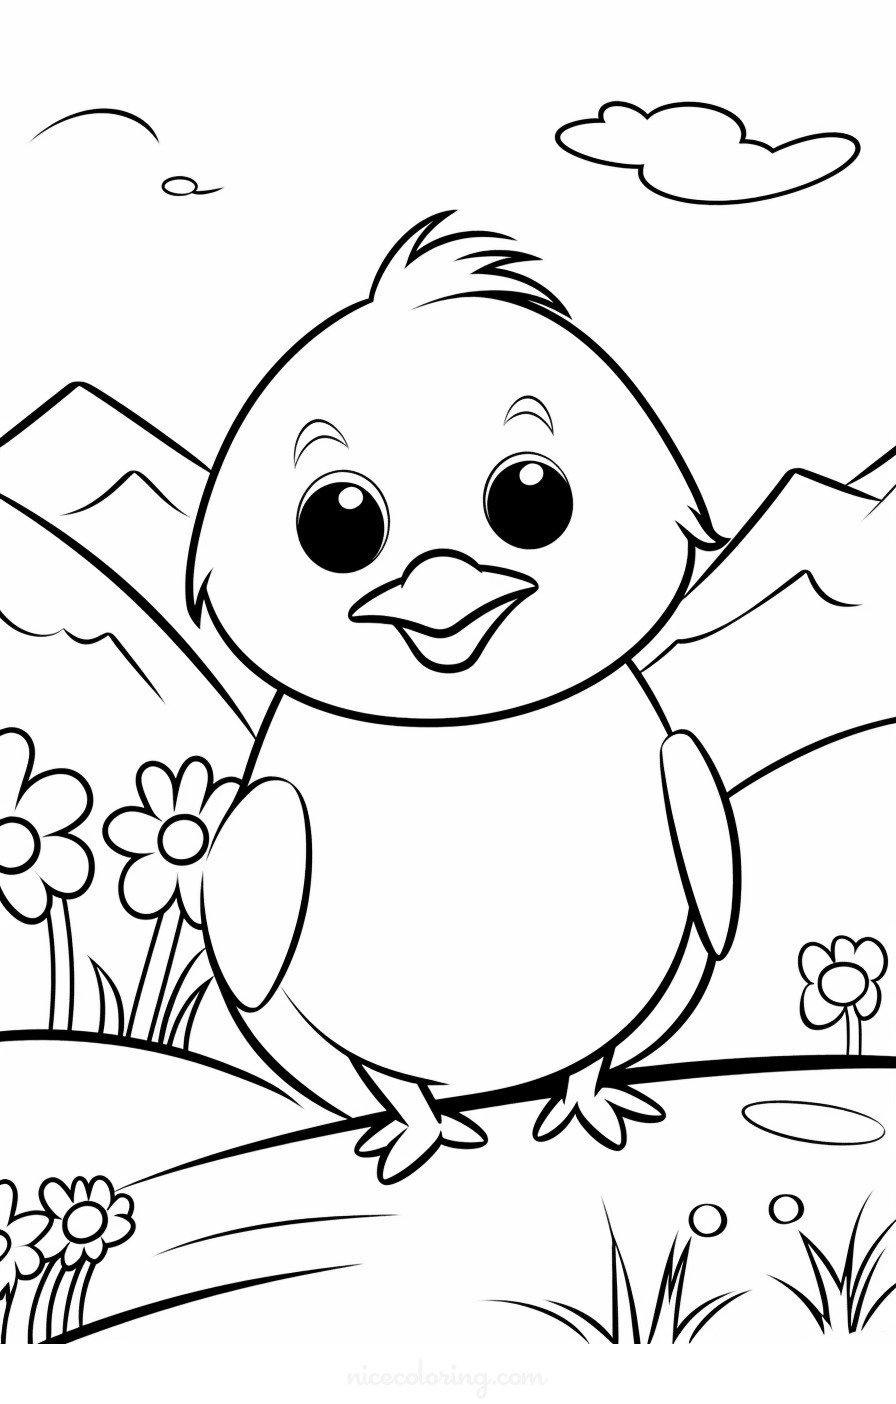 Hummingbird hovering over flowers coloring page